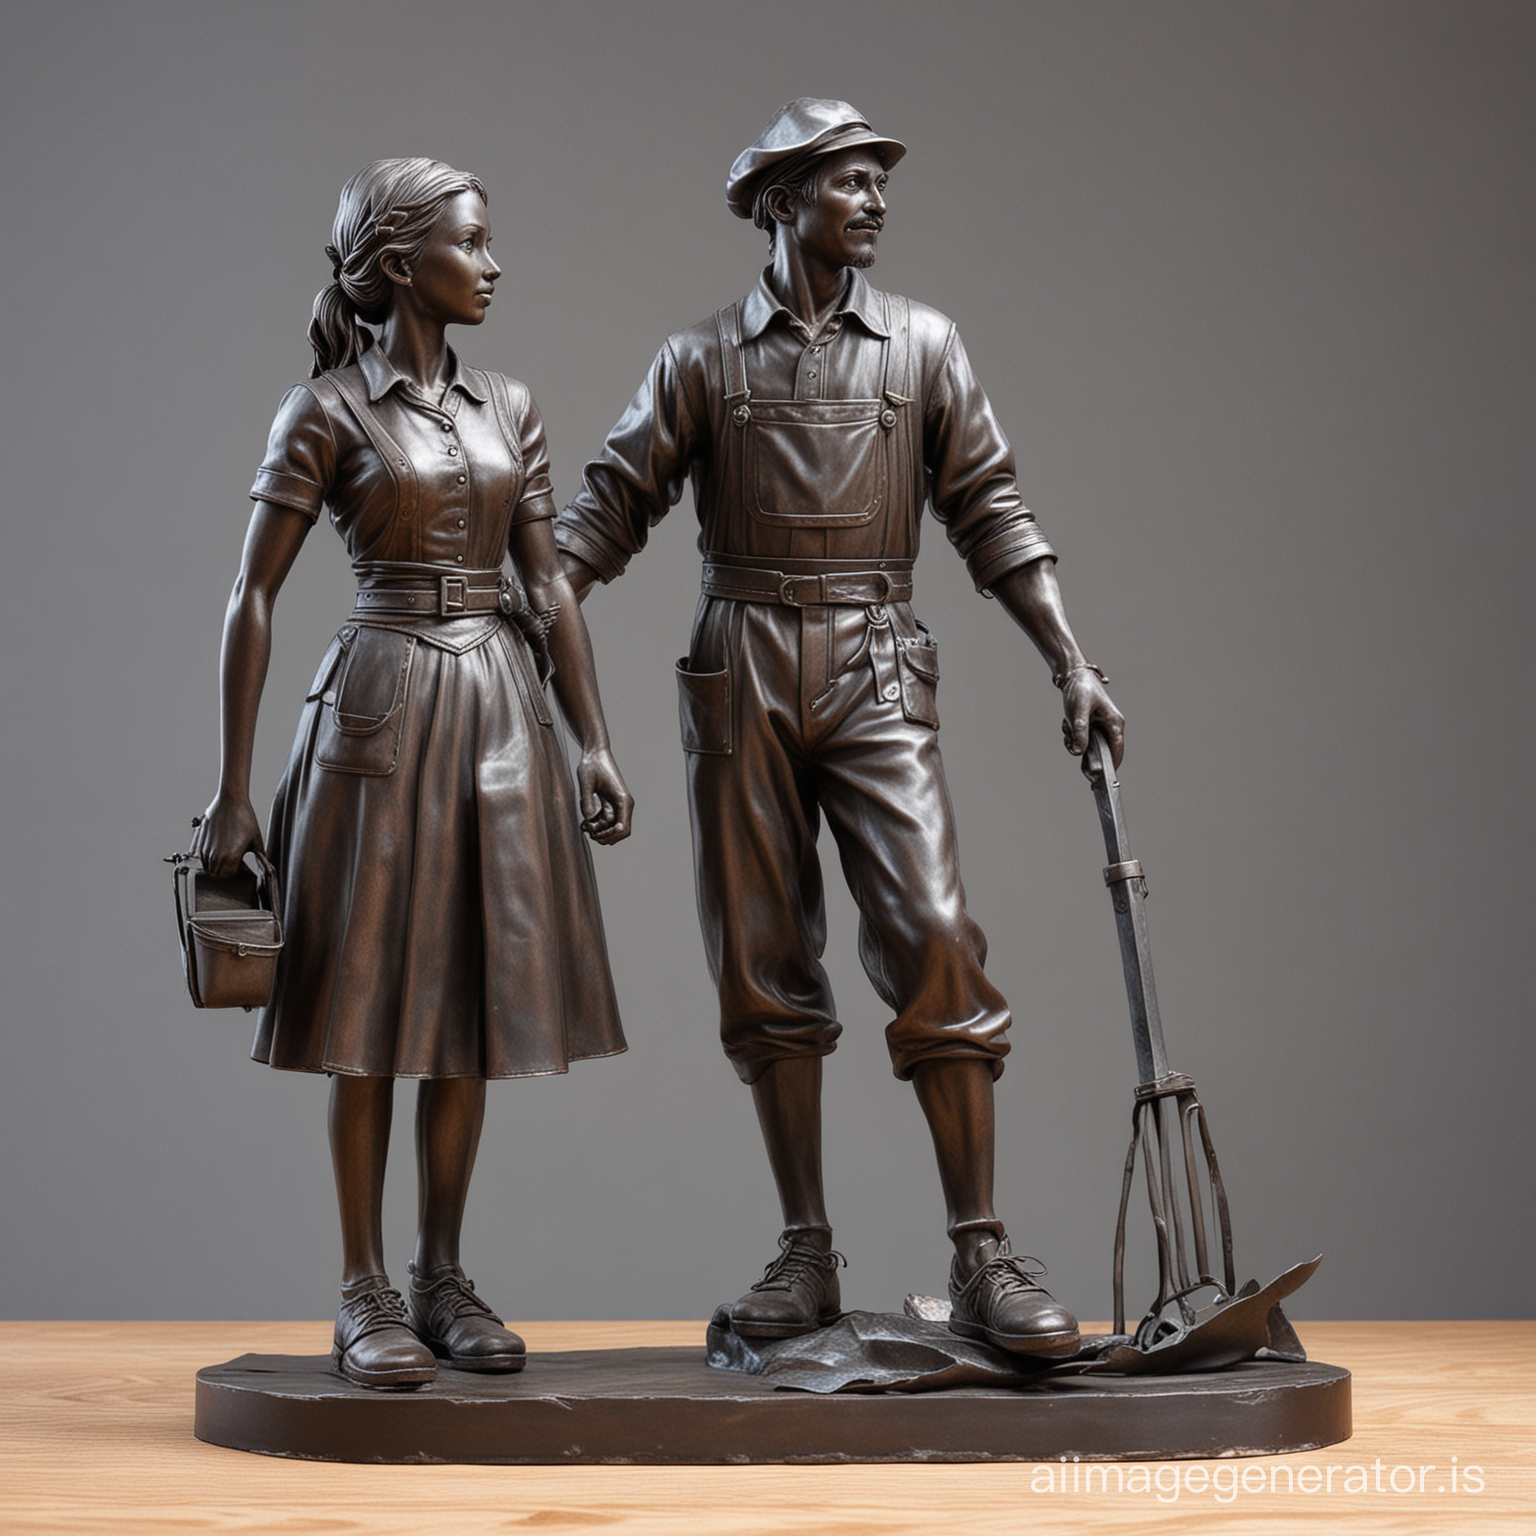 The steel sculpture of a Worker man and a Peasant girl in epic poses